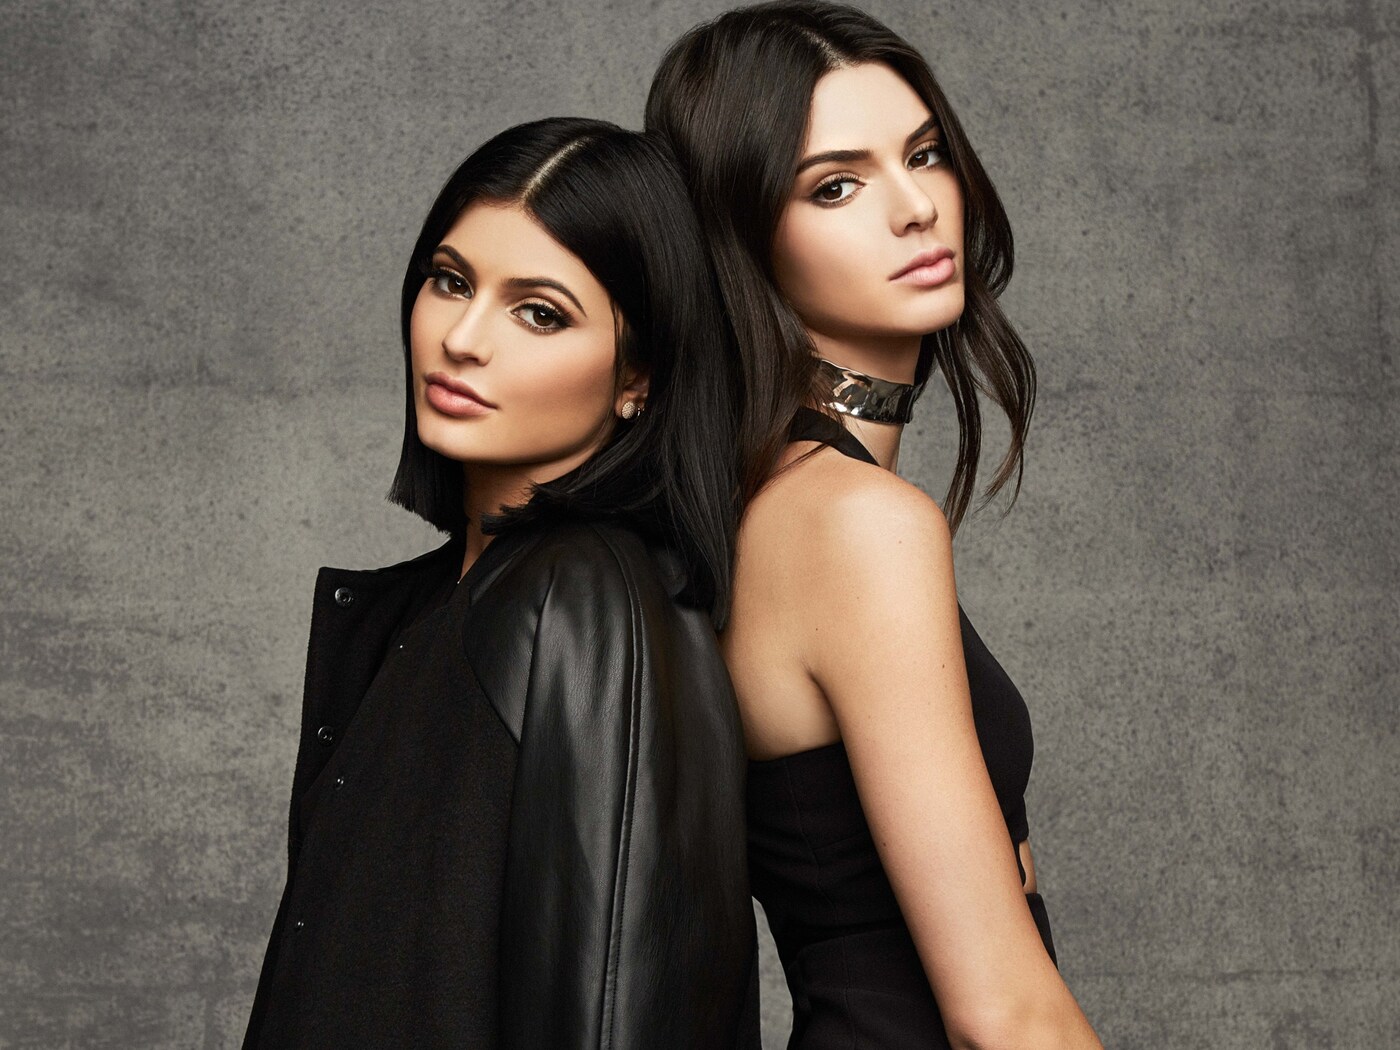 1400x1050 Kylie And Kendall Jenner 1400x1050 Resolution HD 4k ...